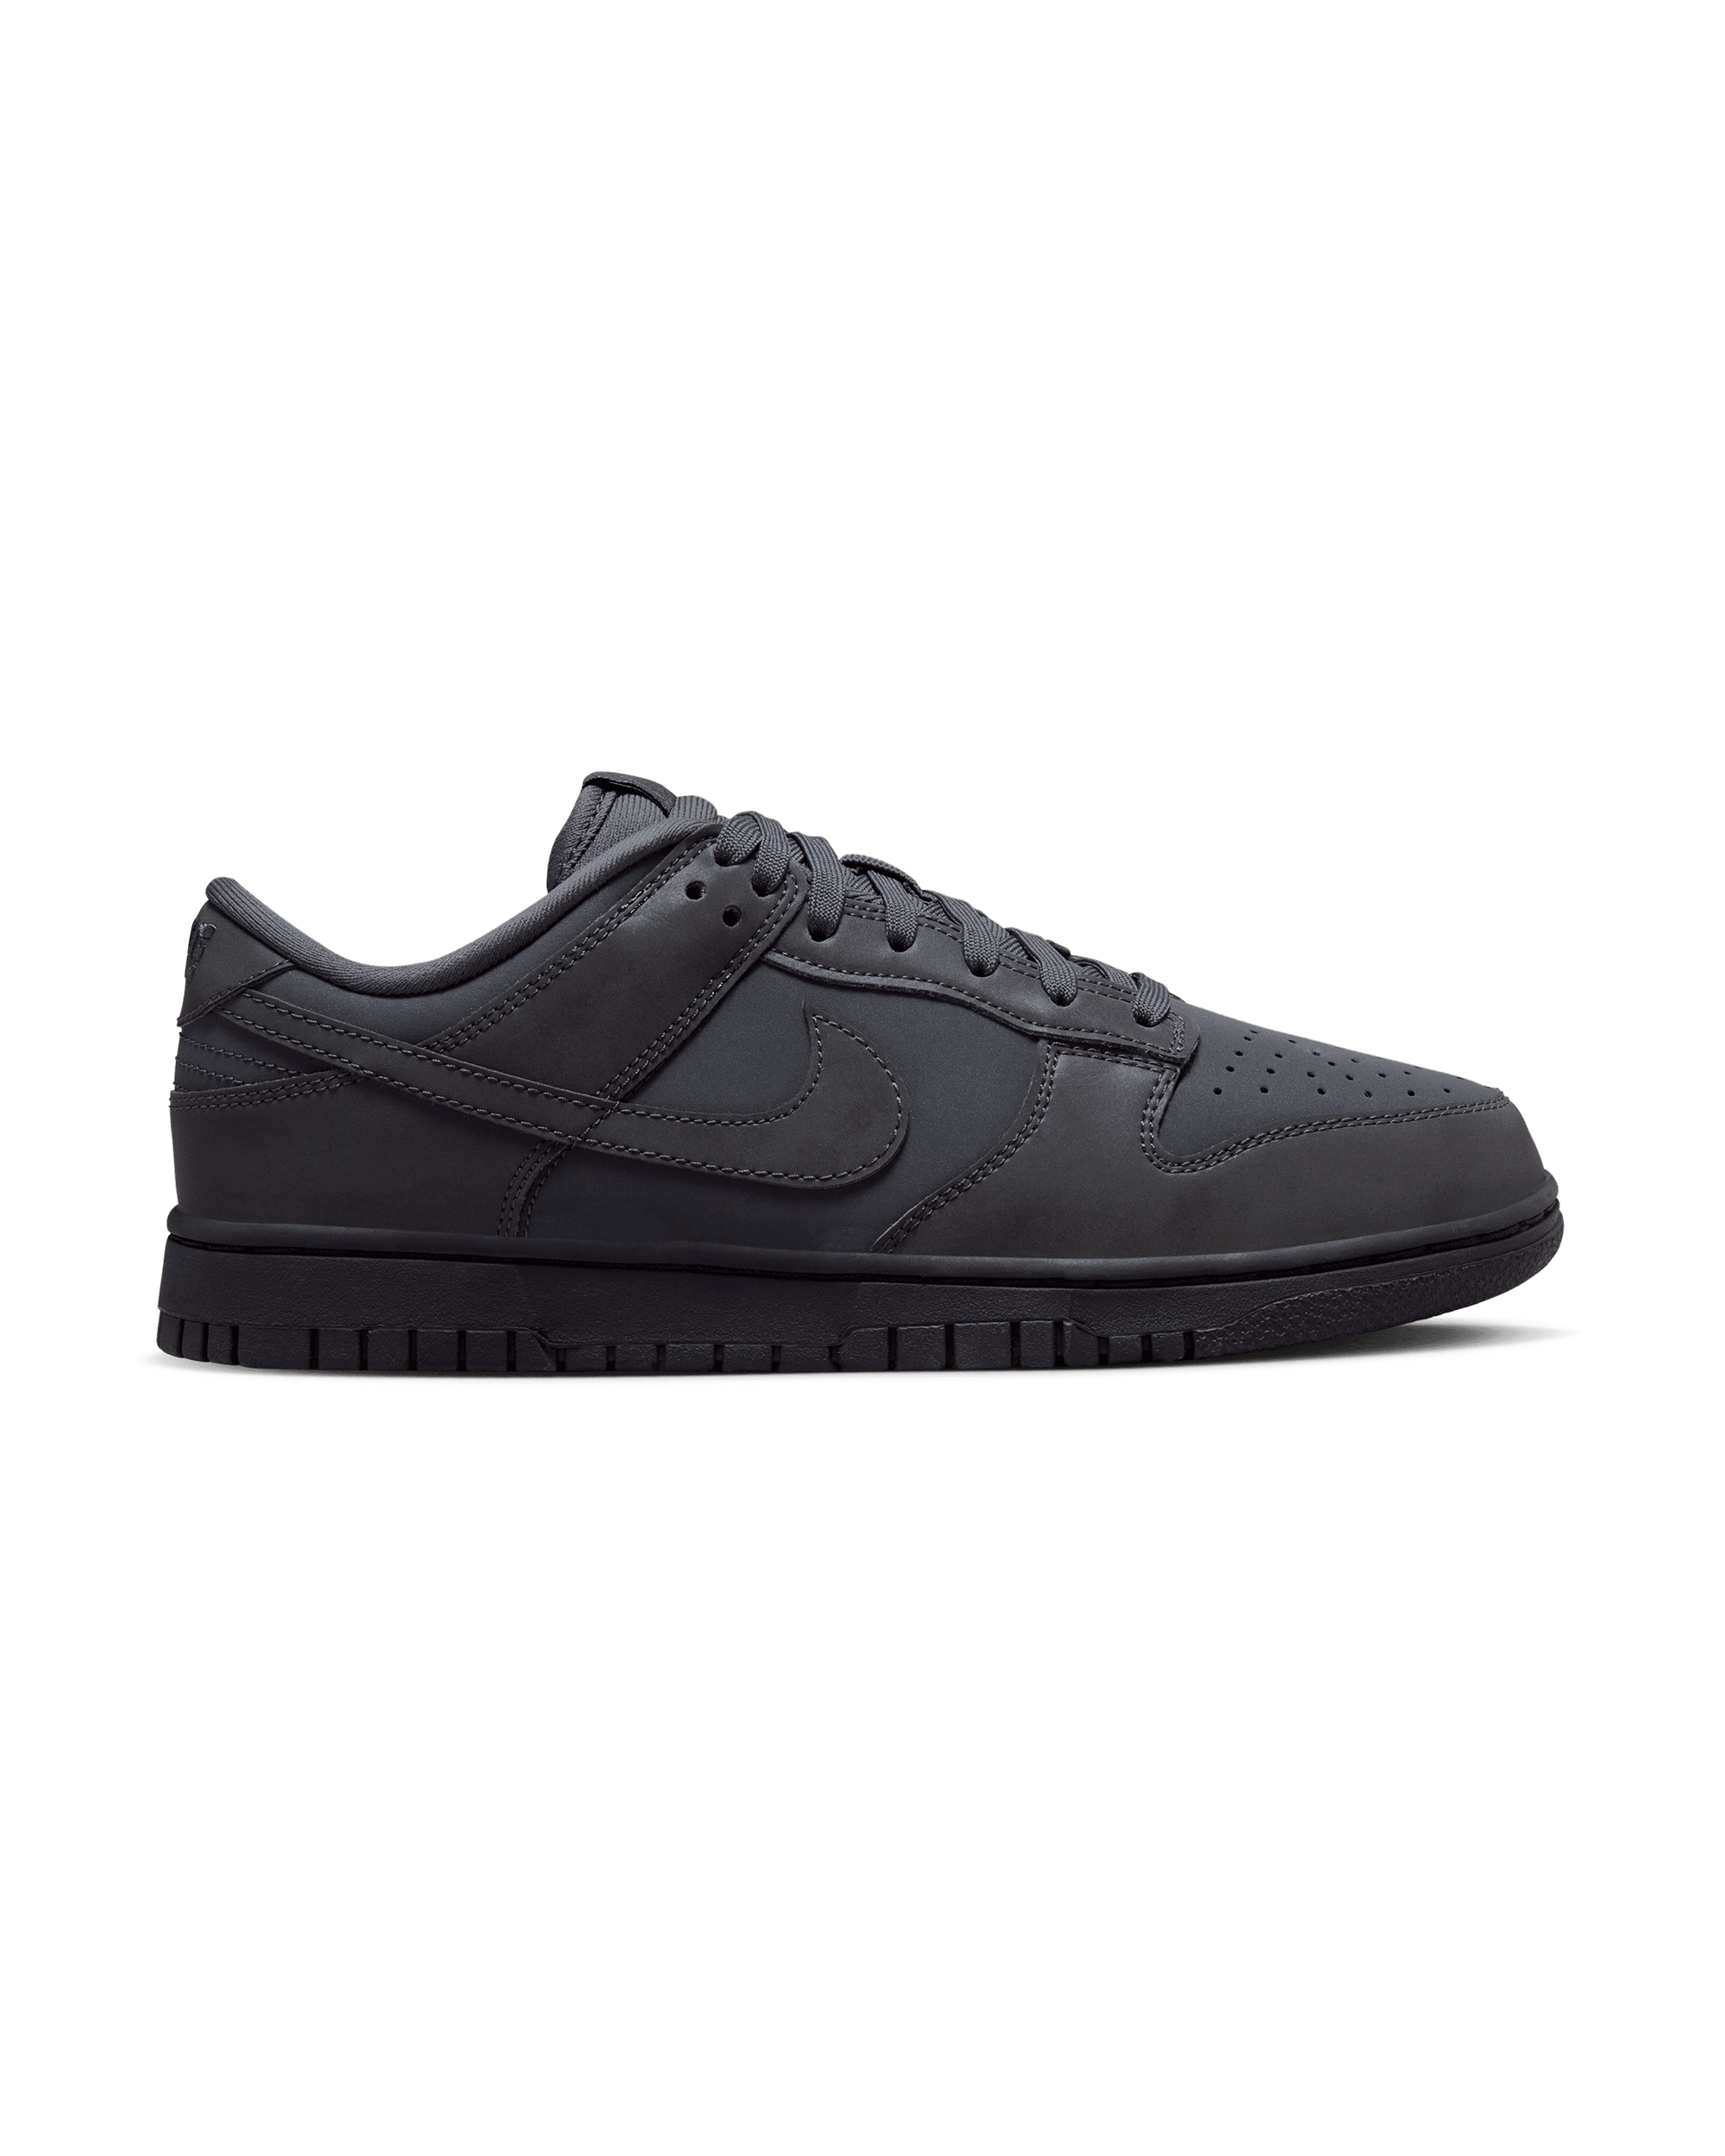 Womens Dunk Low "Cyber Reflective" - Black / Anthracite